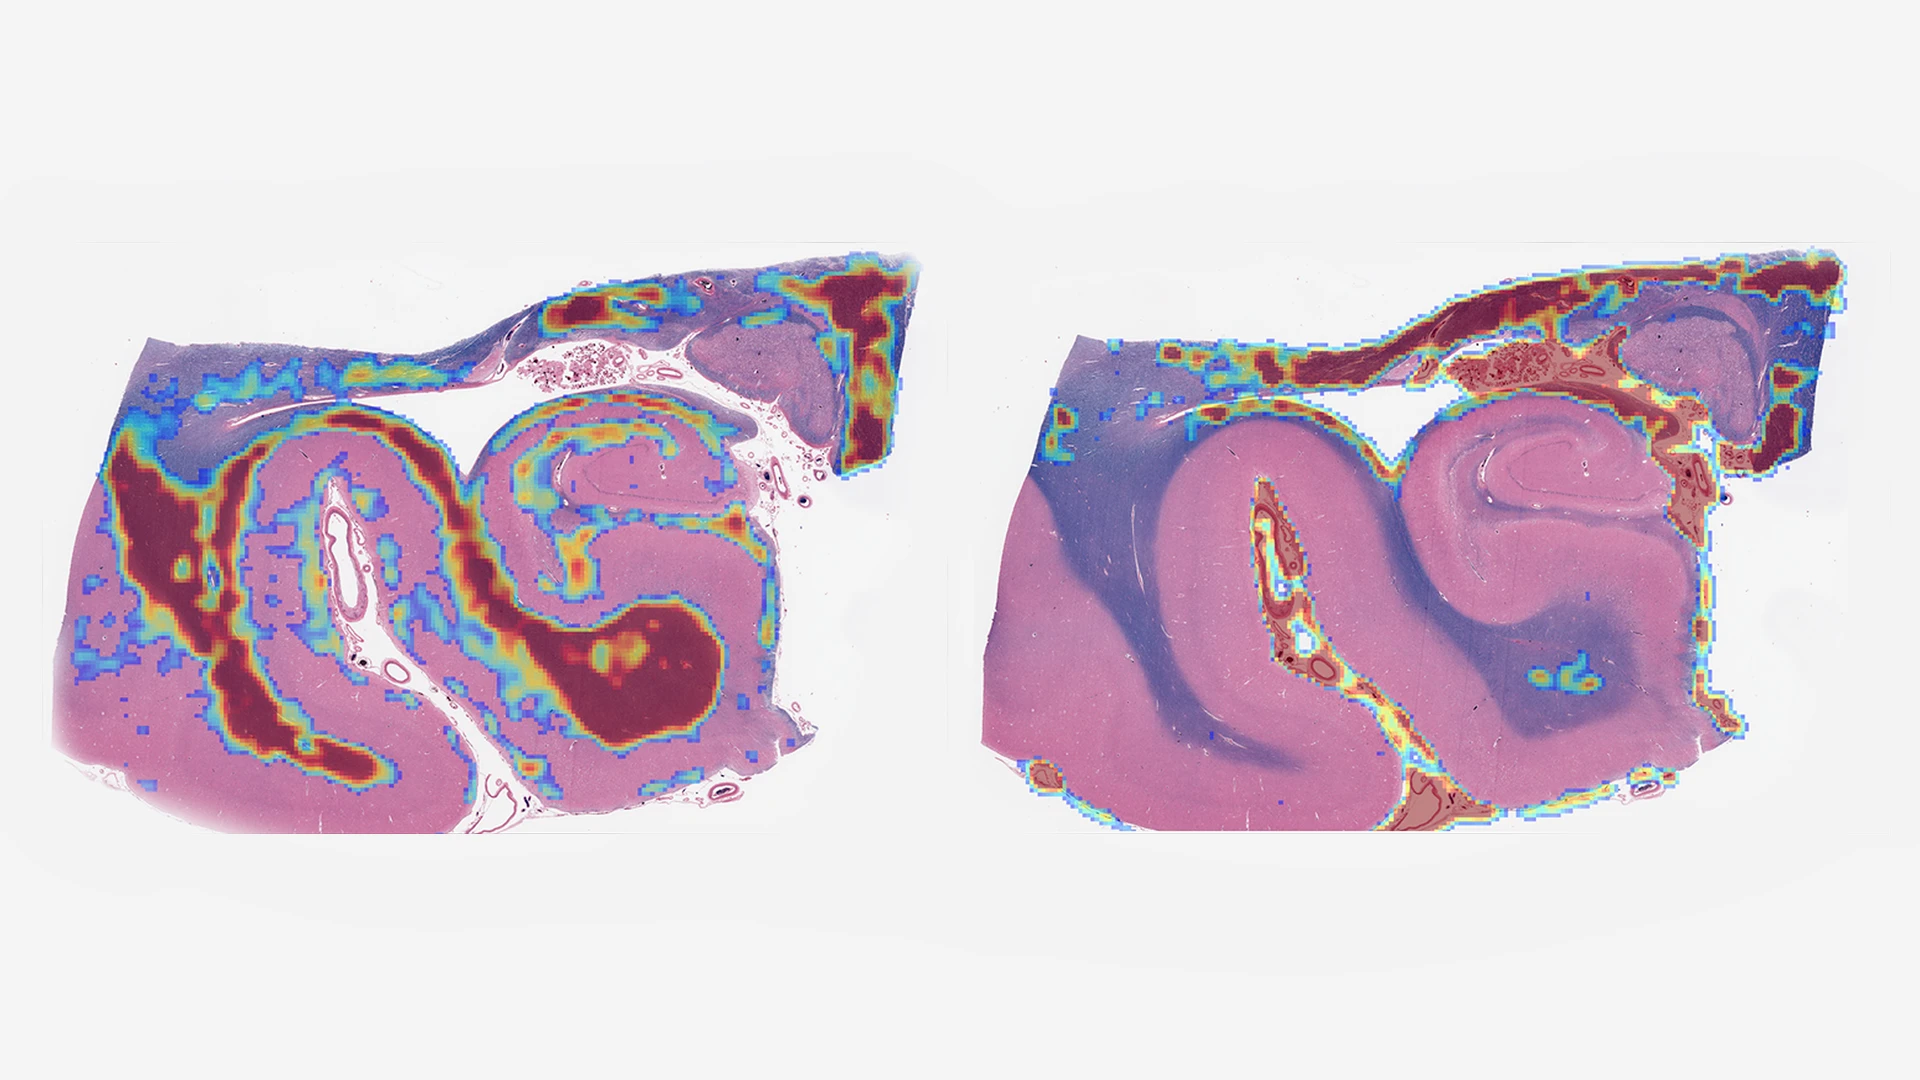 Figure 1. Digital whole-slide images of a human hippocampus analyzed using an age-acceleration algorithm developed by Gabriel Marx, MD, a research track Neurology resident at Mount Sinai. The Rainwater Charitable Foundation is funding Mount Sinai investigators to use AI to measure histological features too complex or subtle for human observers.